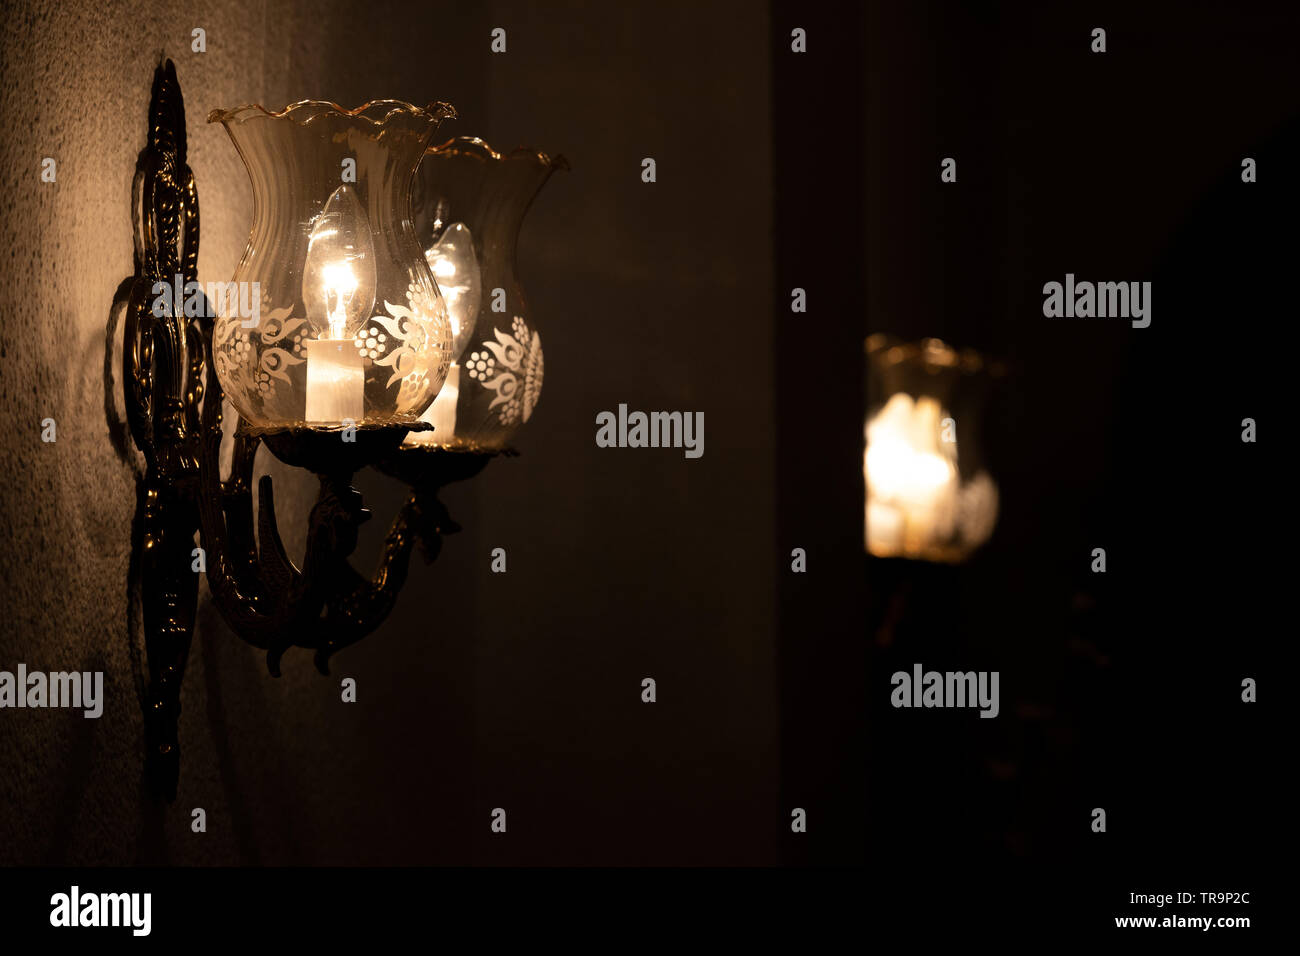 Wall lamps in gloom producing a disturbing atmosphere Stock Photo